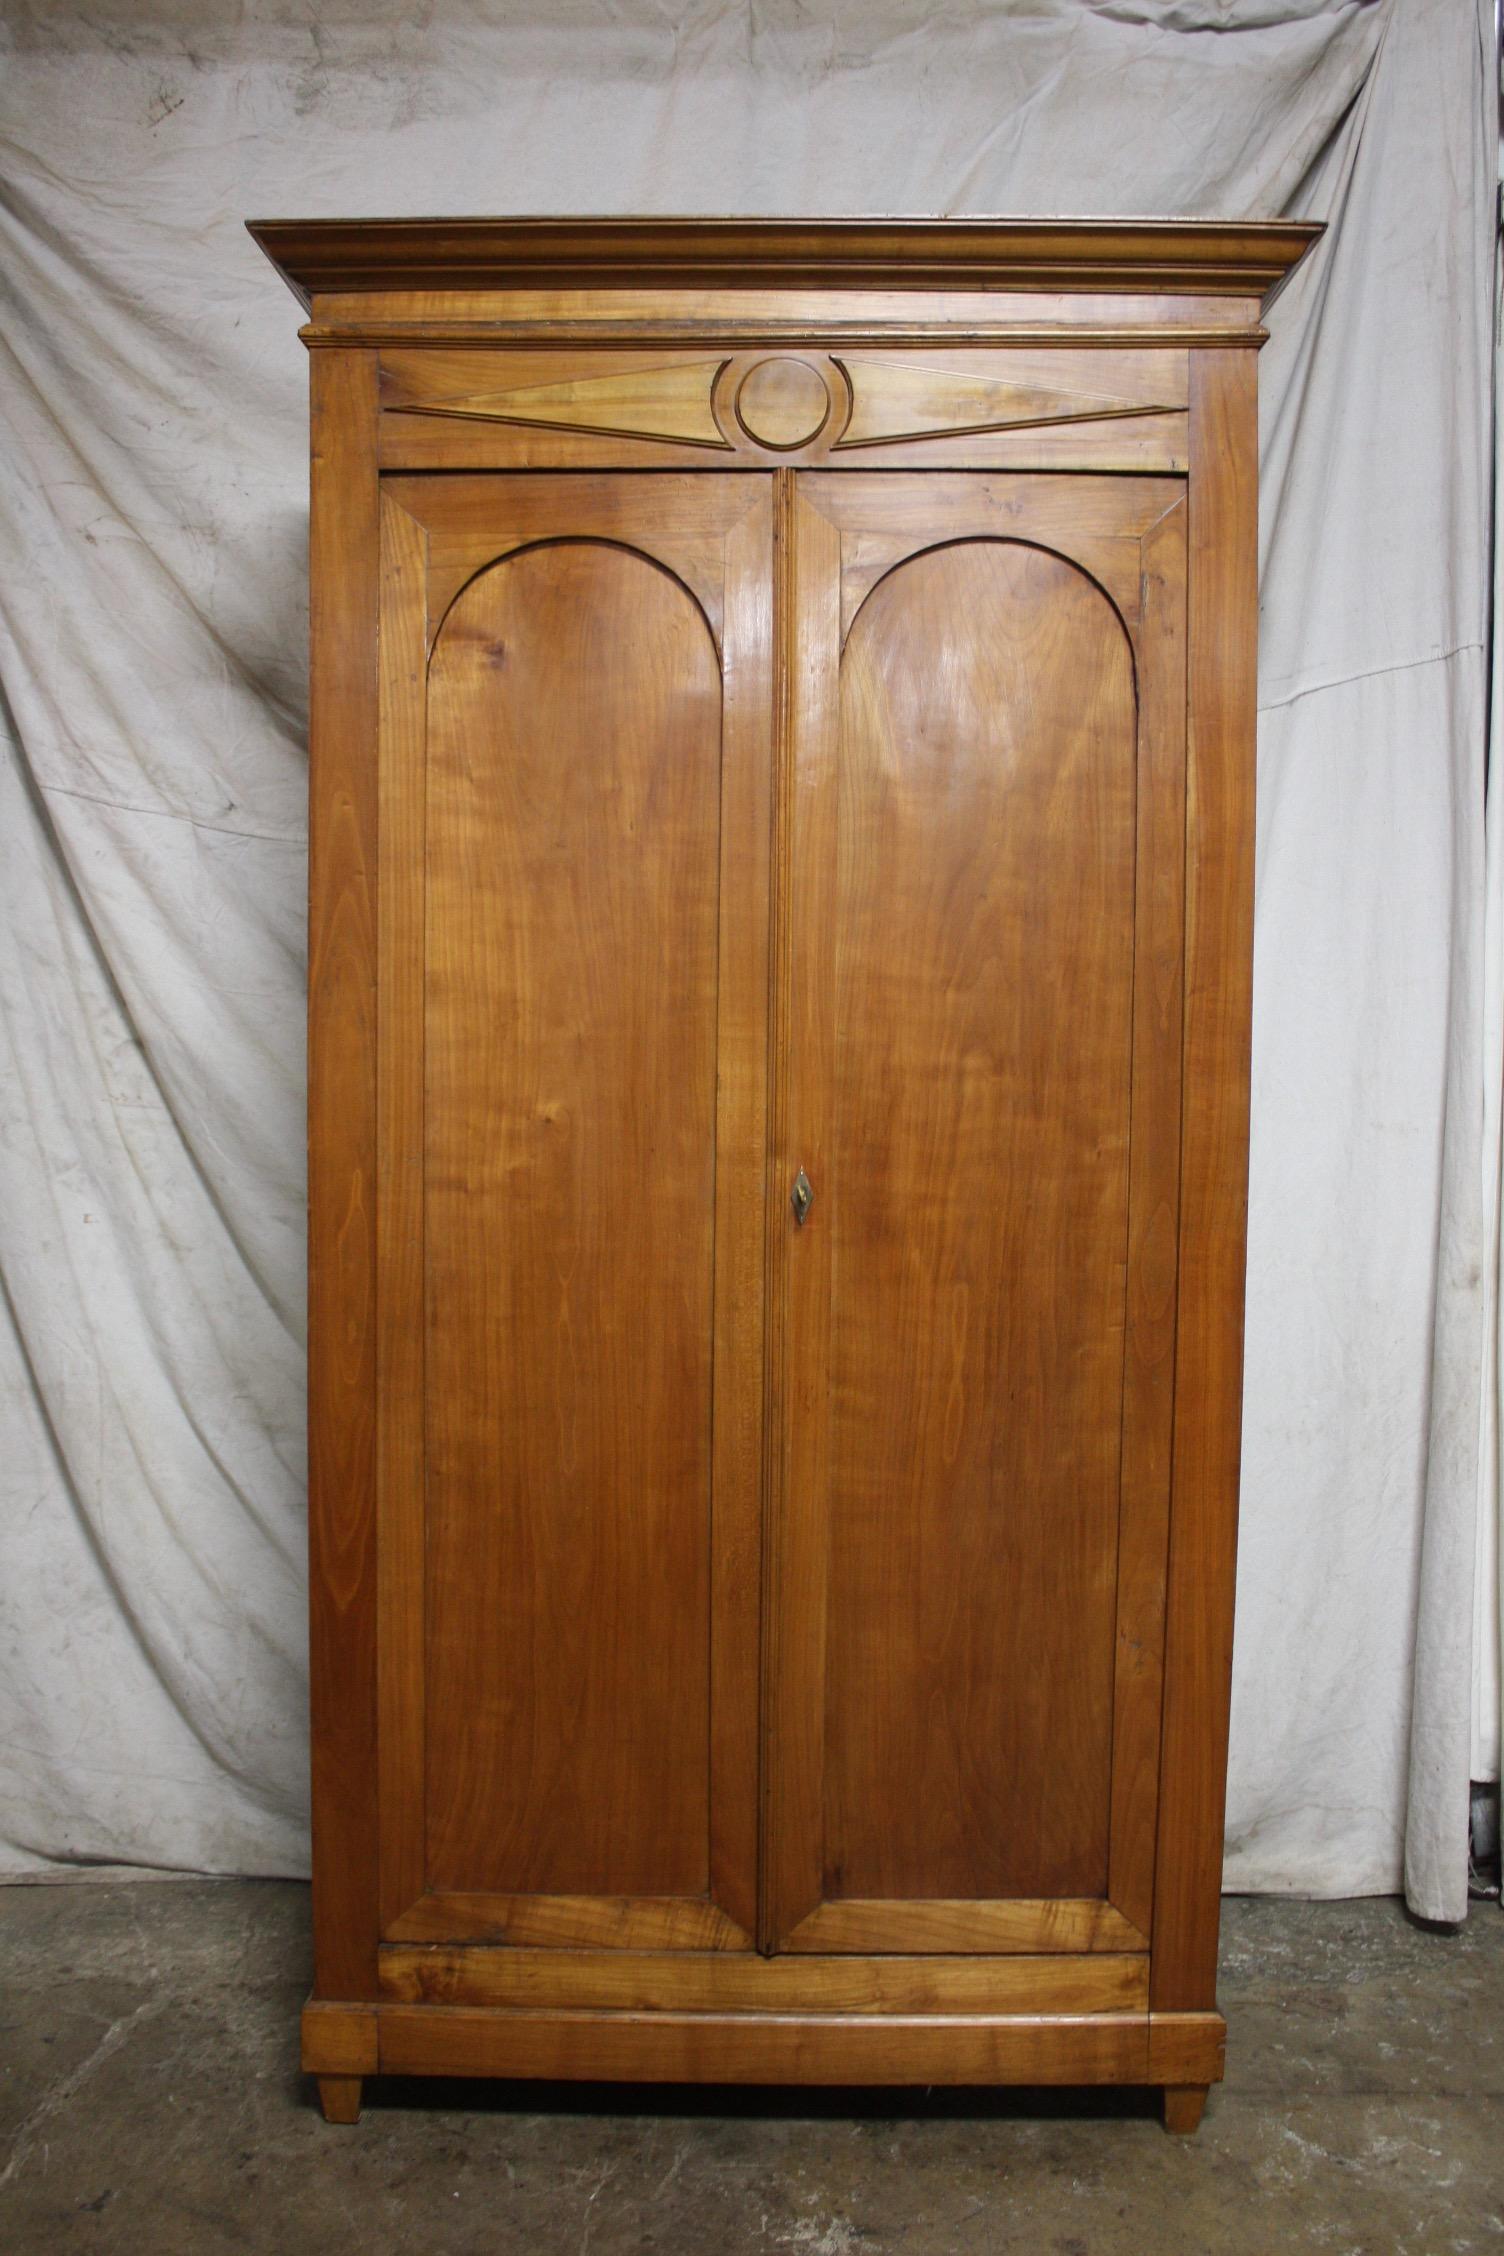 Small, tall and narrow Armoire, nice blond walnut, very interesting by its proportion, simple and elegant.